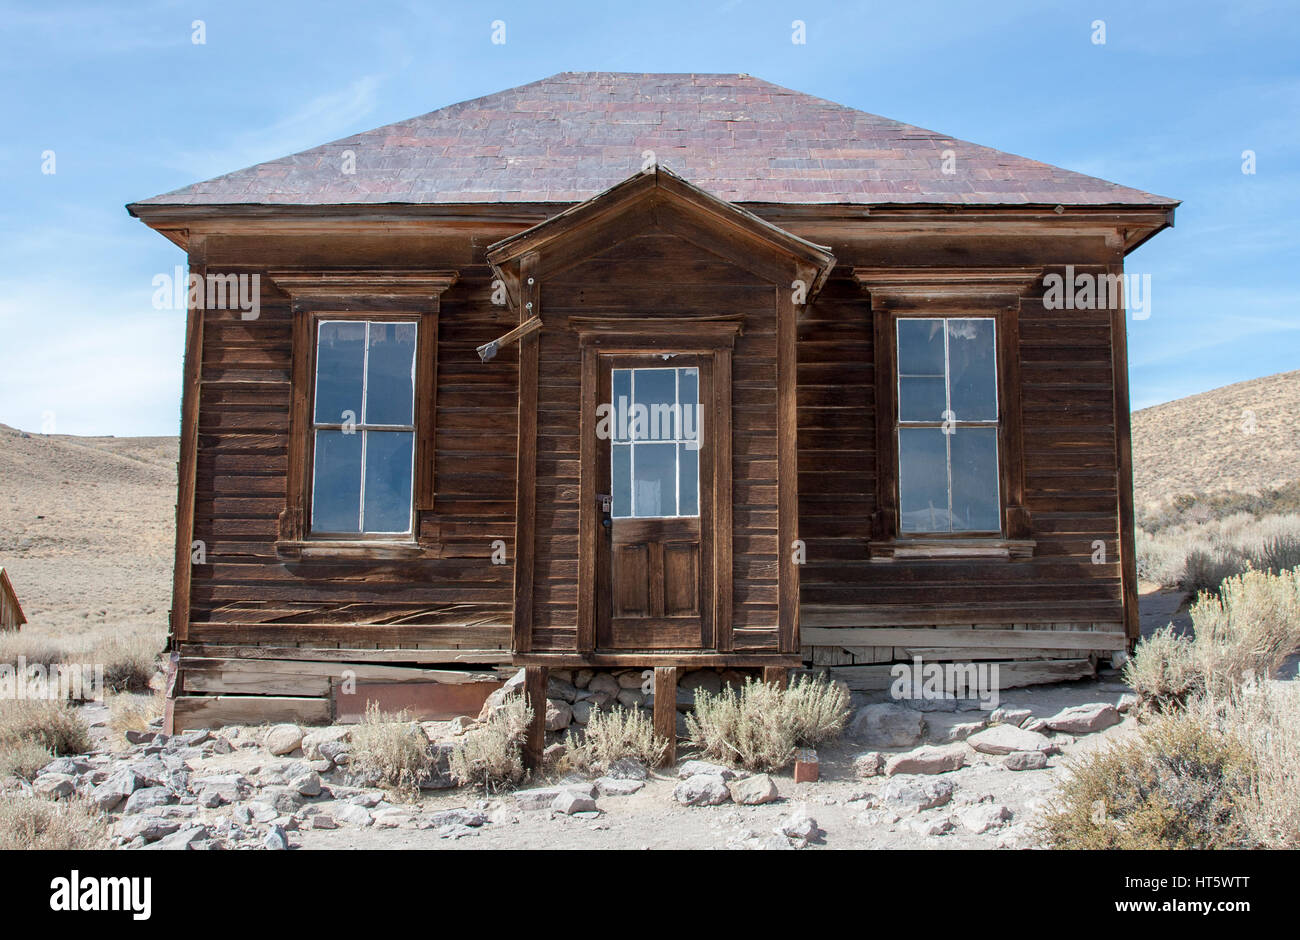 The Bodie State Park is the remains of Bodie, a silver and copper mining town in the eastern California desert. Stock Photo